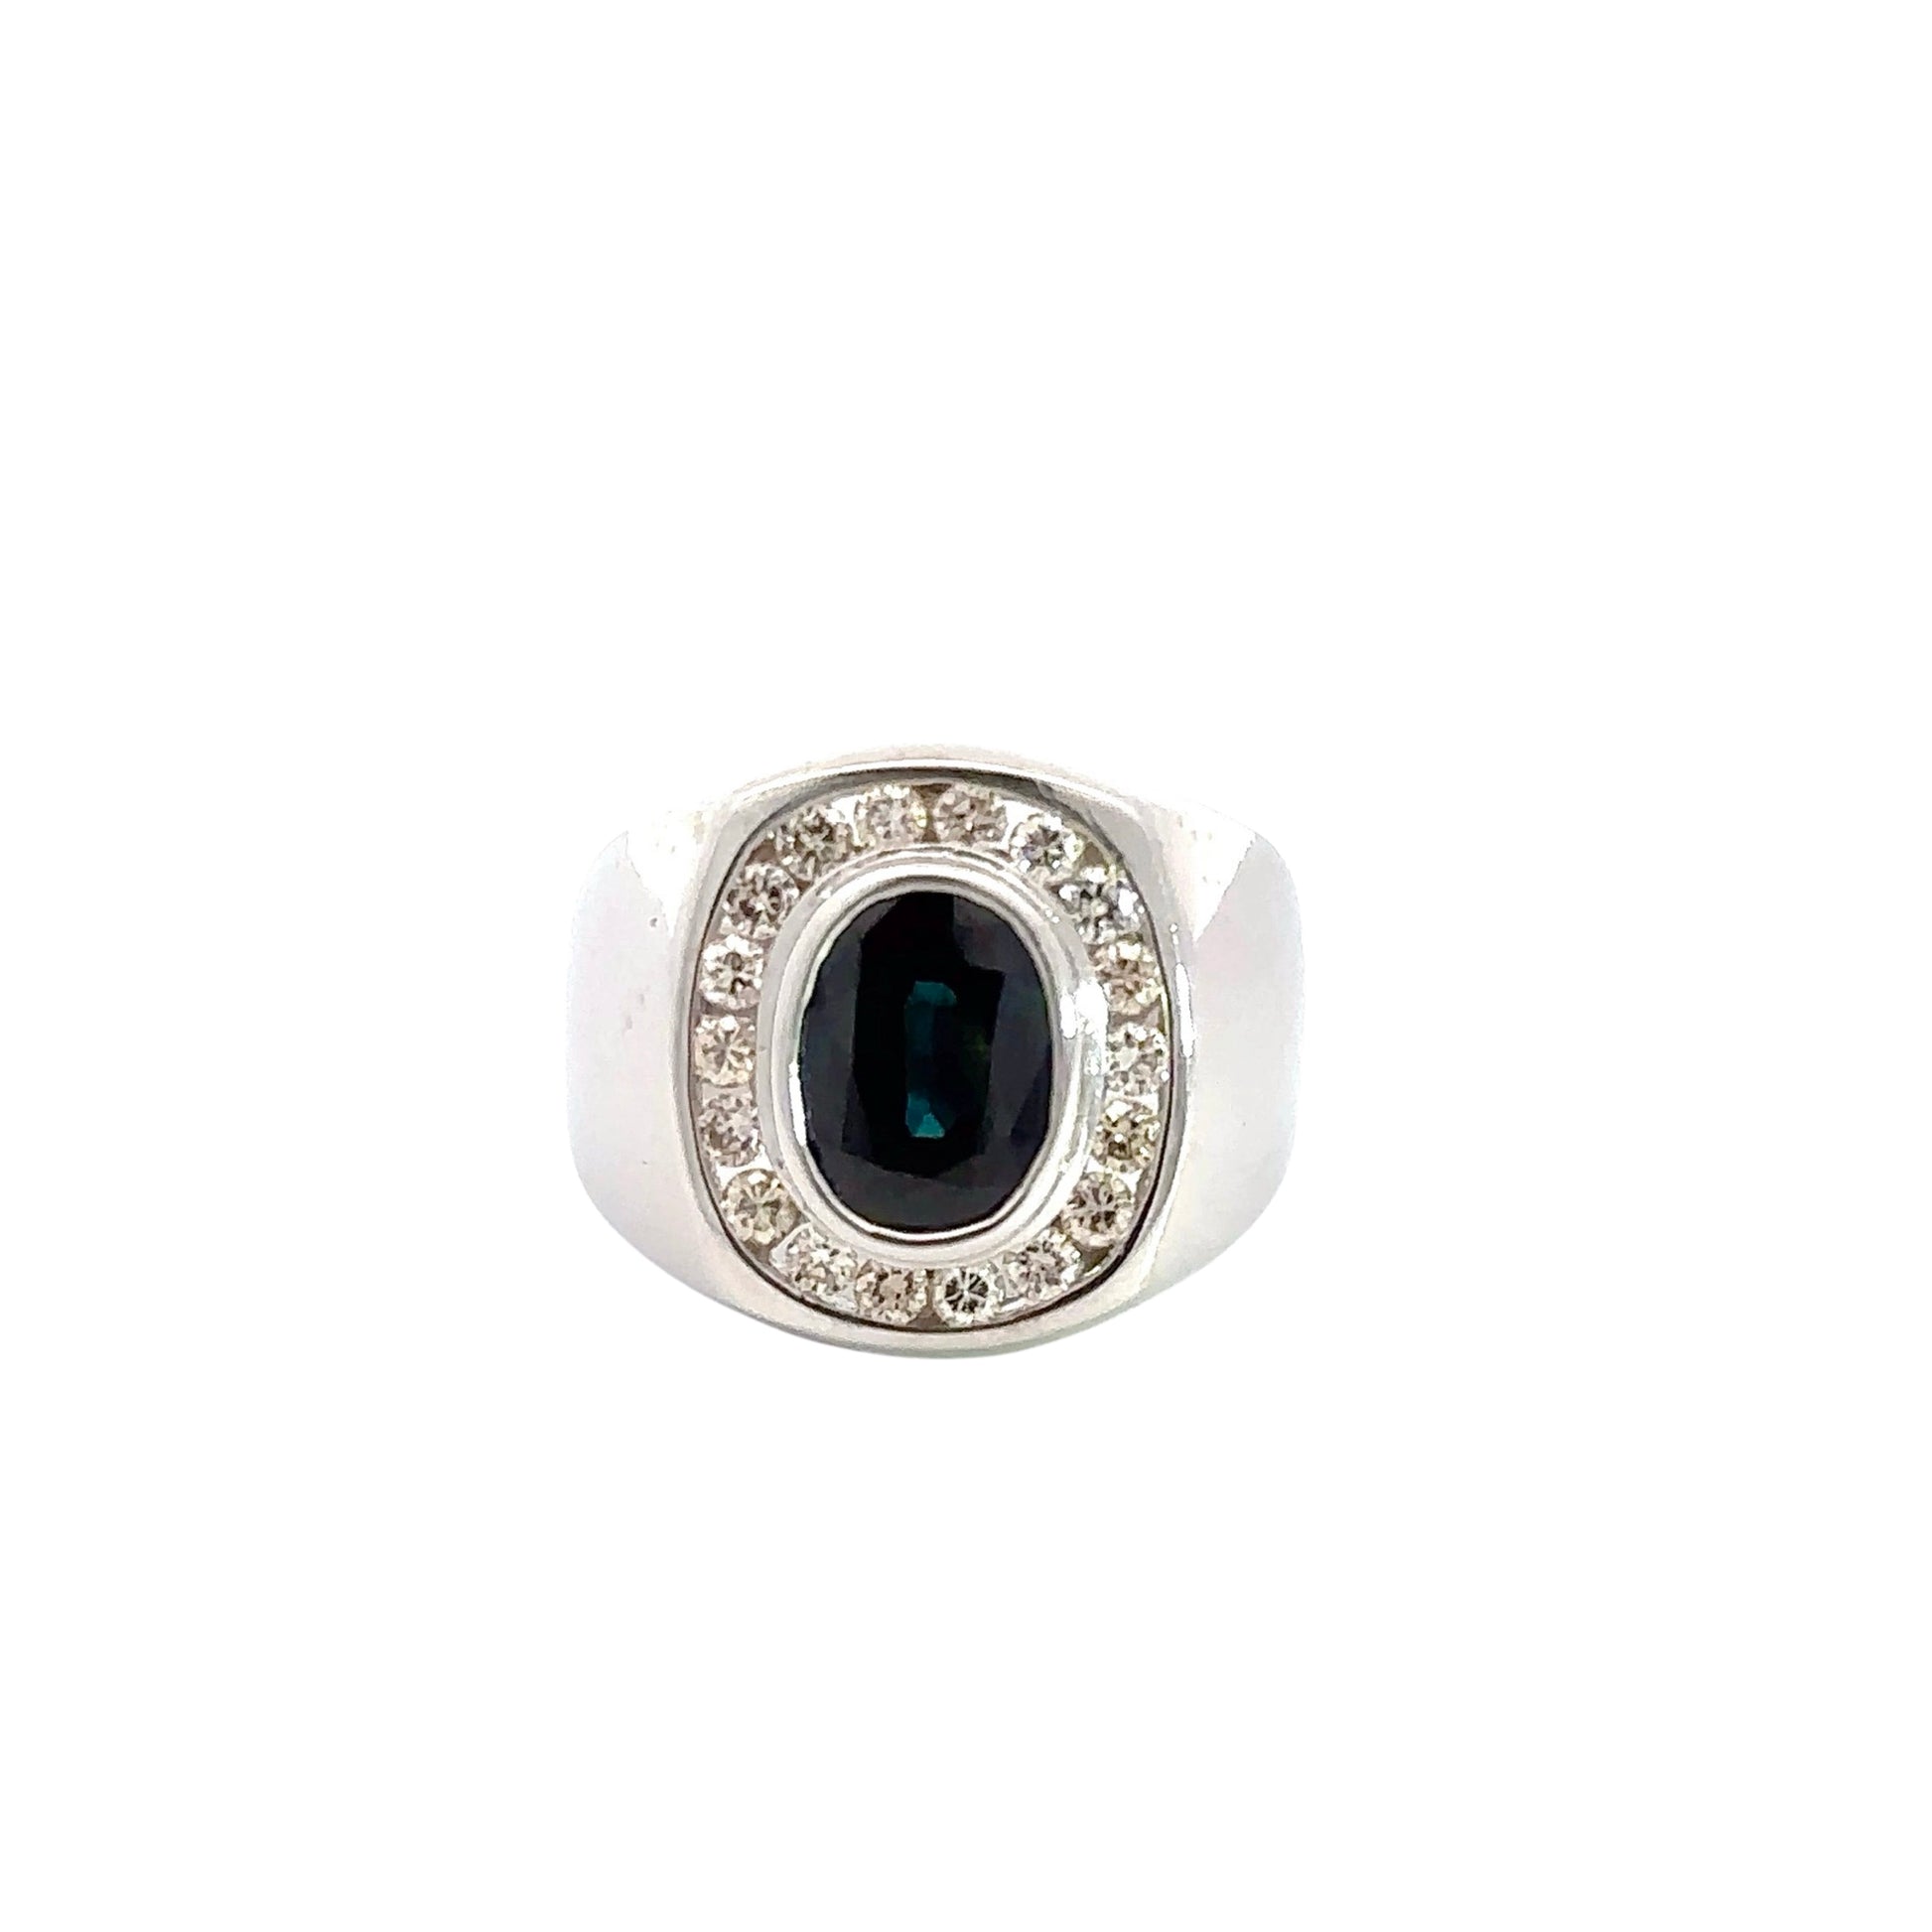 Front of white gold dome shaped ring with 1 dark blue oval-shaped Sapphire in center and  18 round diamonds surrounding it. Shows scratches on gold 